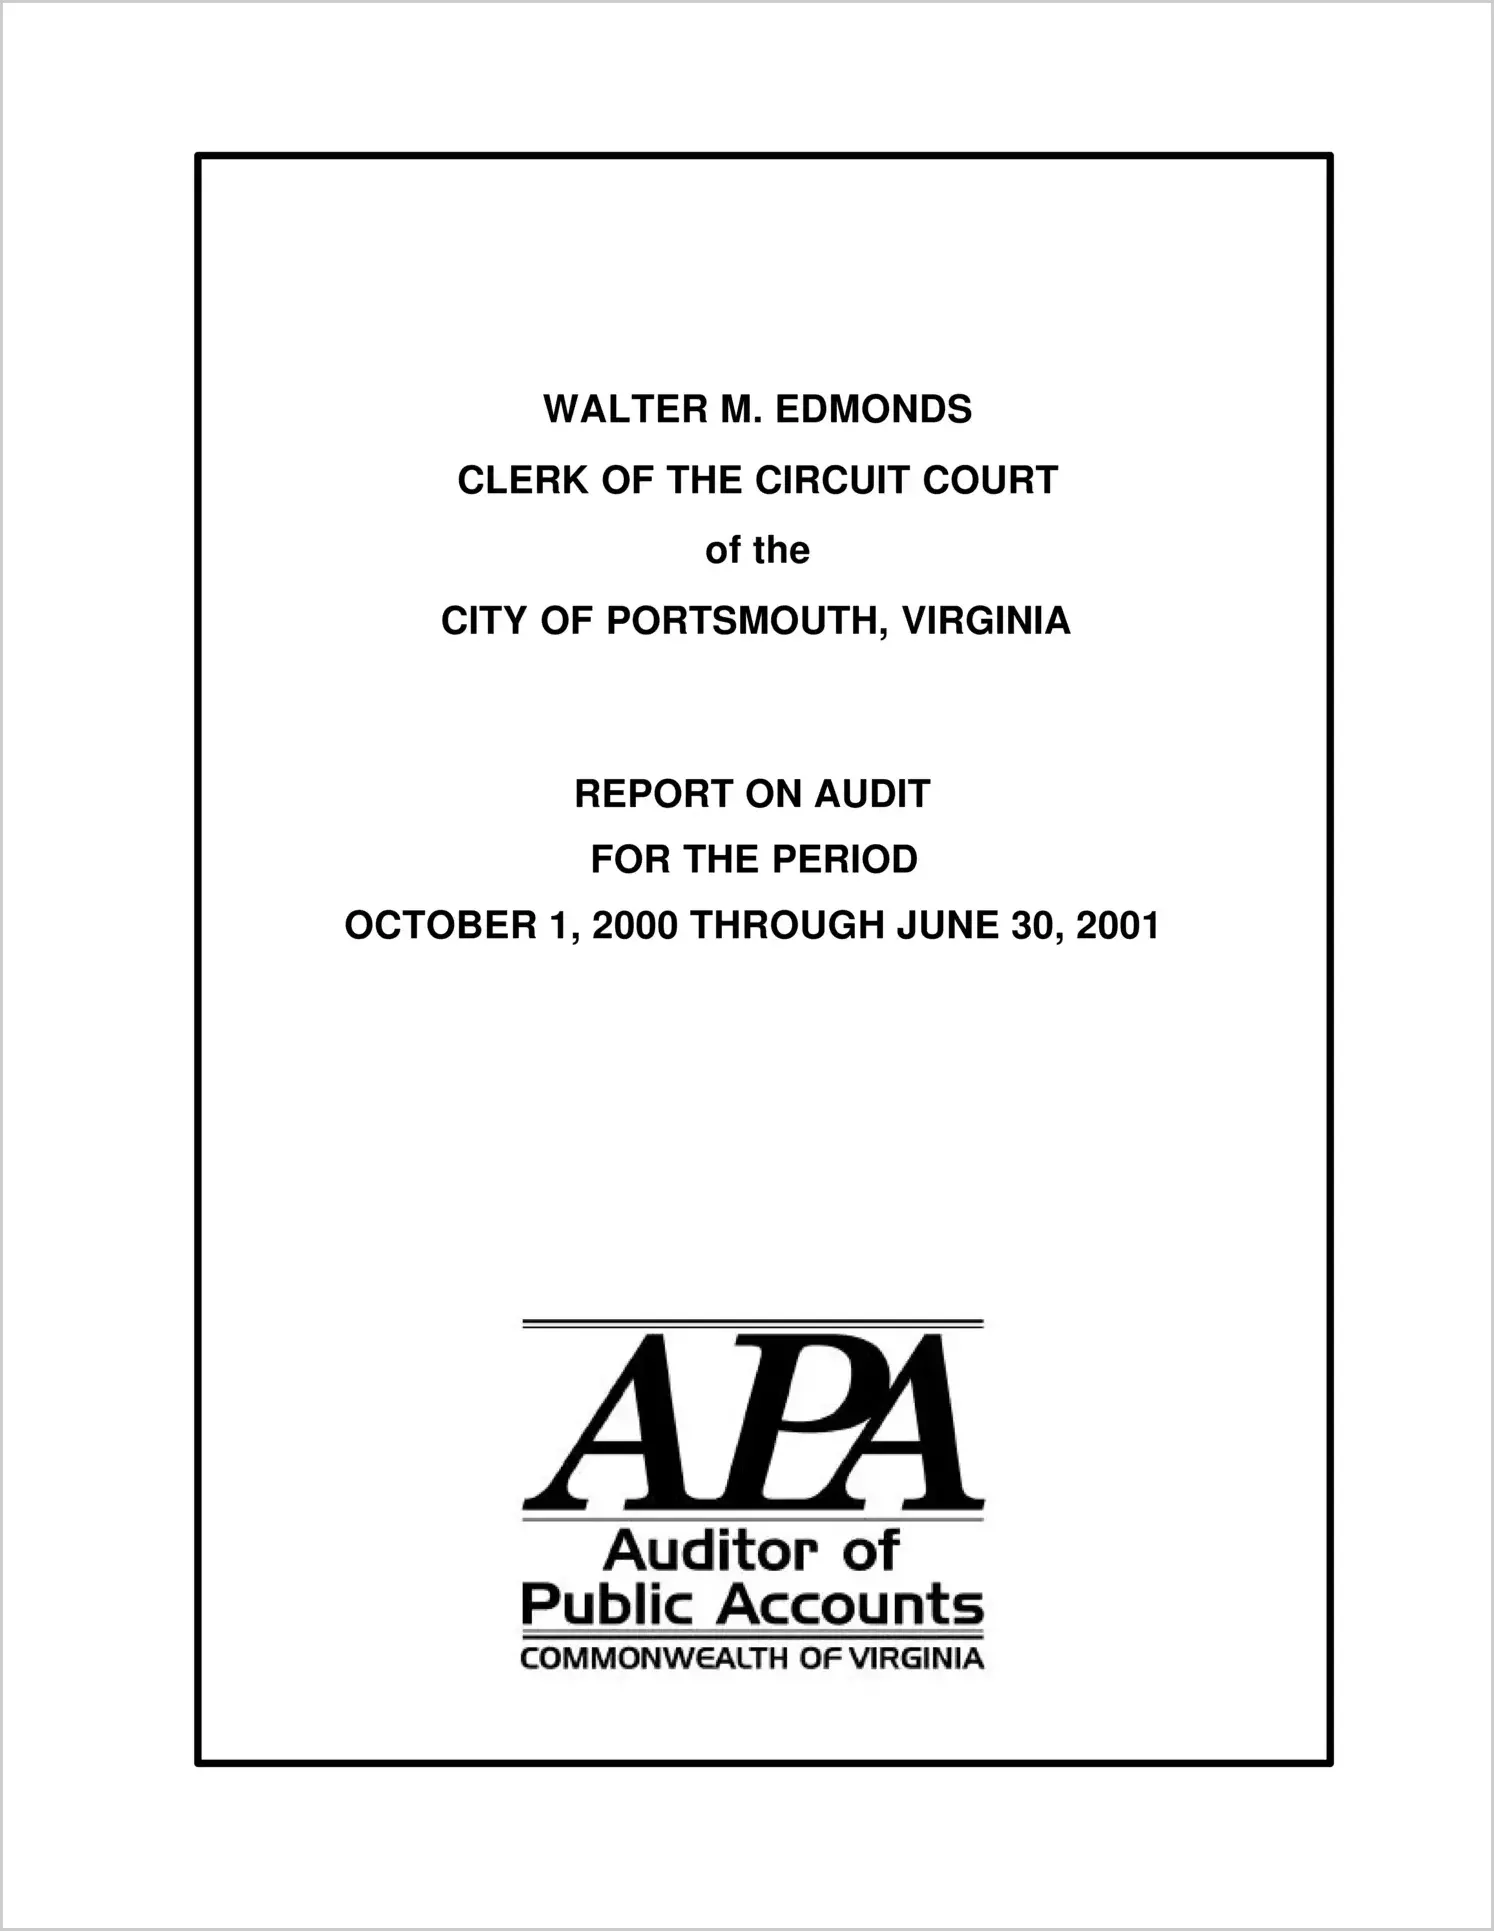 Clerk of the Circuit Court of the City of Portsmouth for the period October 1, 2000 through June 30, 2001